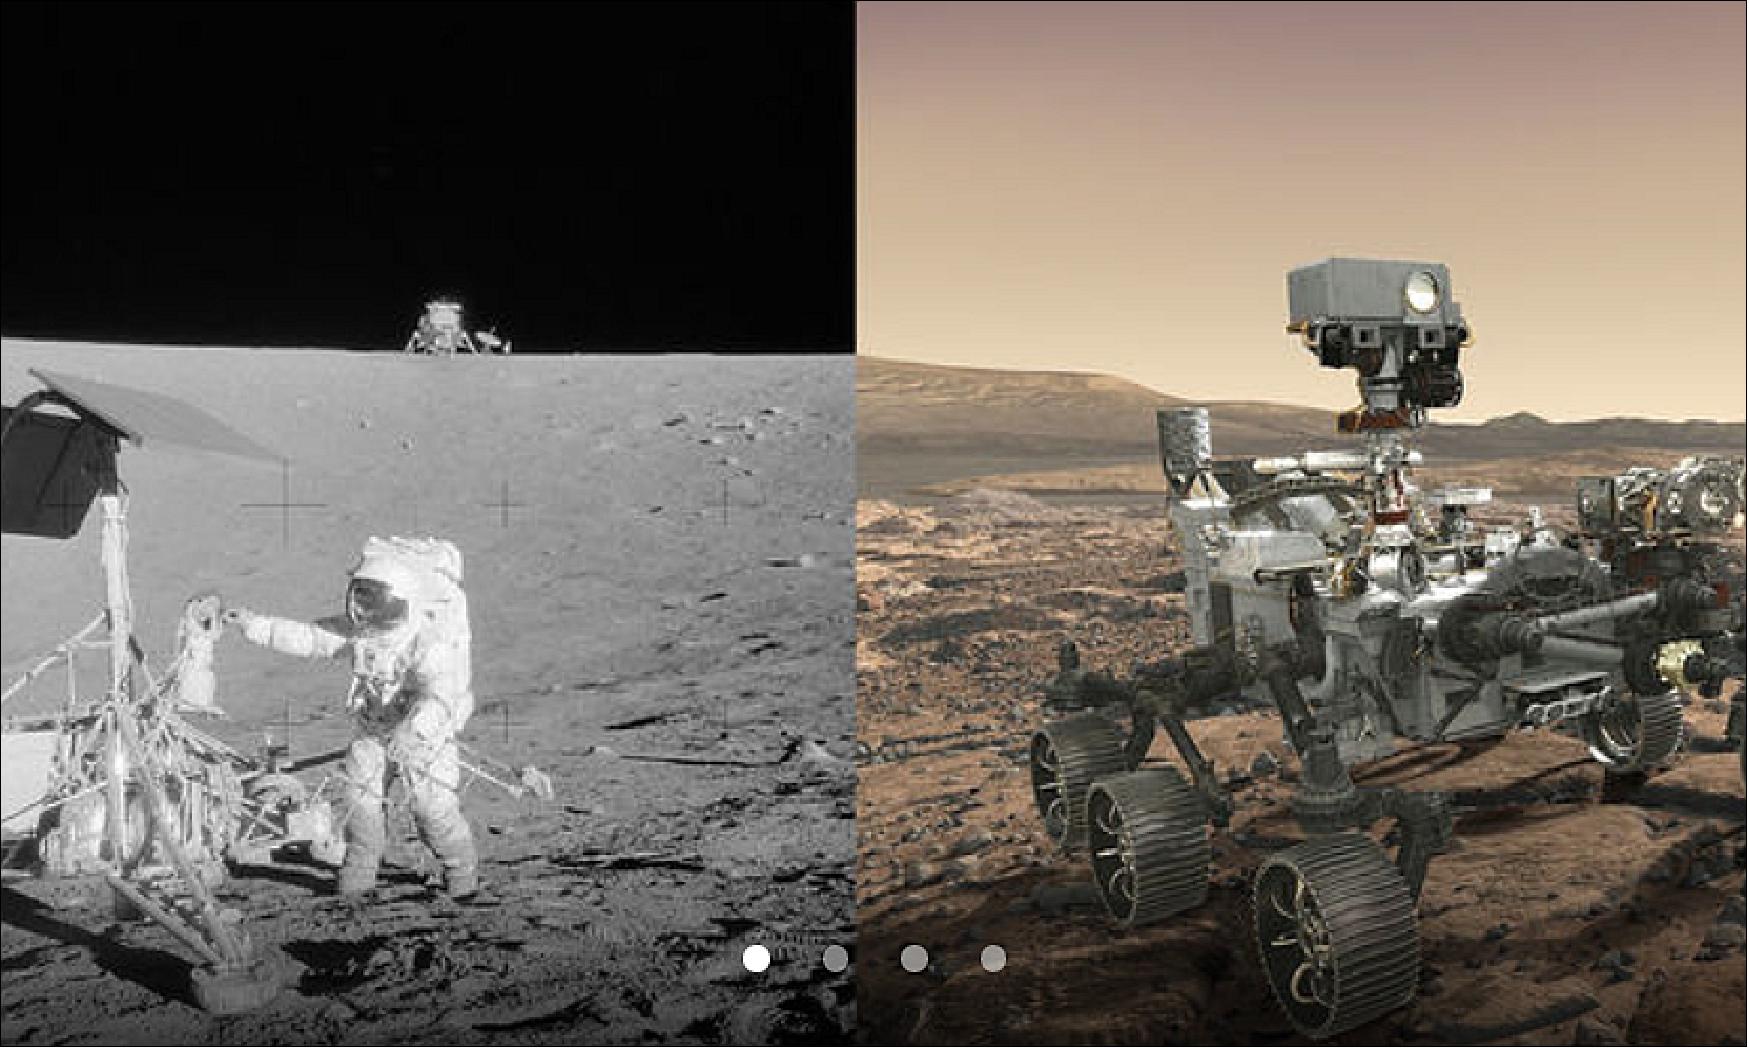 Figure 8: Left: Apollo 12 astronaut Charles "Pete" Conrad Jr. stands beside NASA's Surveyor 3 spacecraft; the lunar module Intrepid can be seen in the distance. Apollo 12 landed on the Moon's Ocean of Storms on Nov. 20, 1969. Right: Mars 2020 rover, seen here in an artist's concept, will make history's most accurate landing on a planetary body when it lands at Mars' Jezero Crater on Feb. 18, 2021 (image credit: NASA/JPL-Caltech)